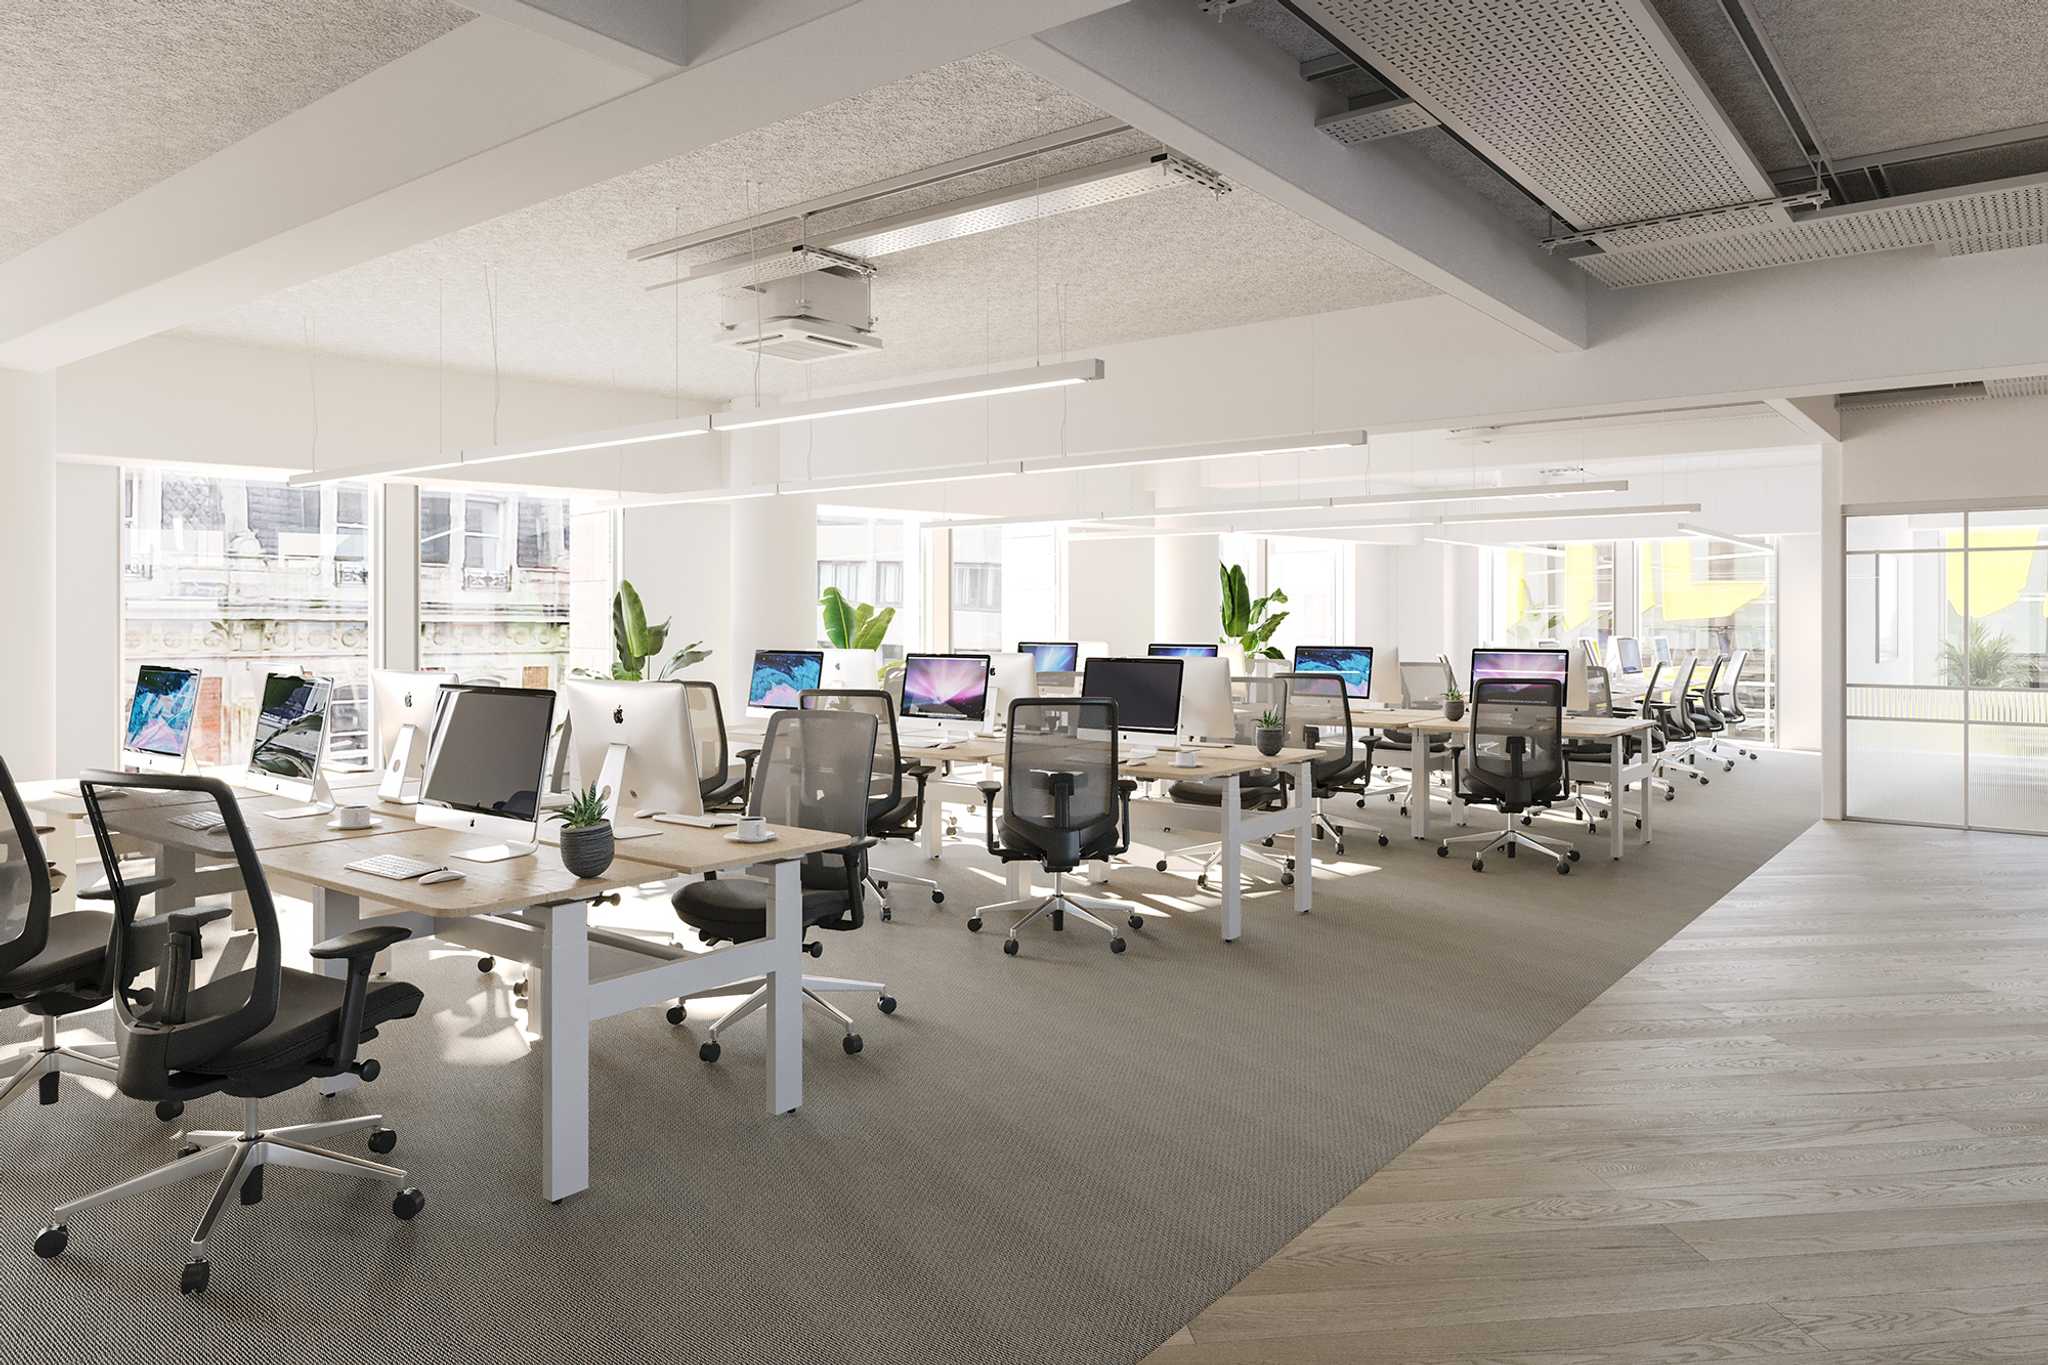 A large, open plan office space at Fora Oxford Street.